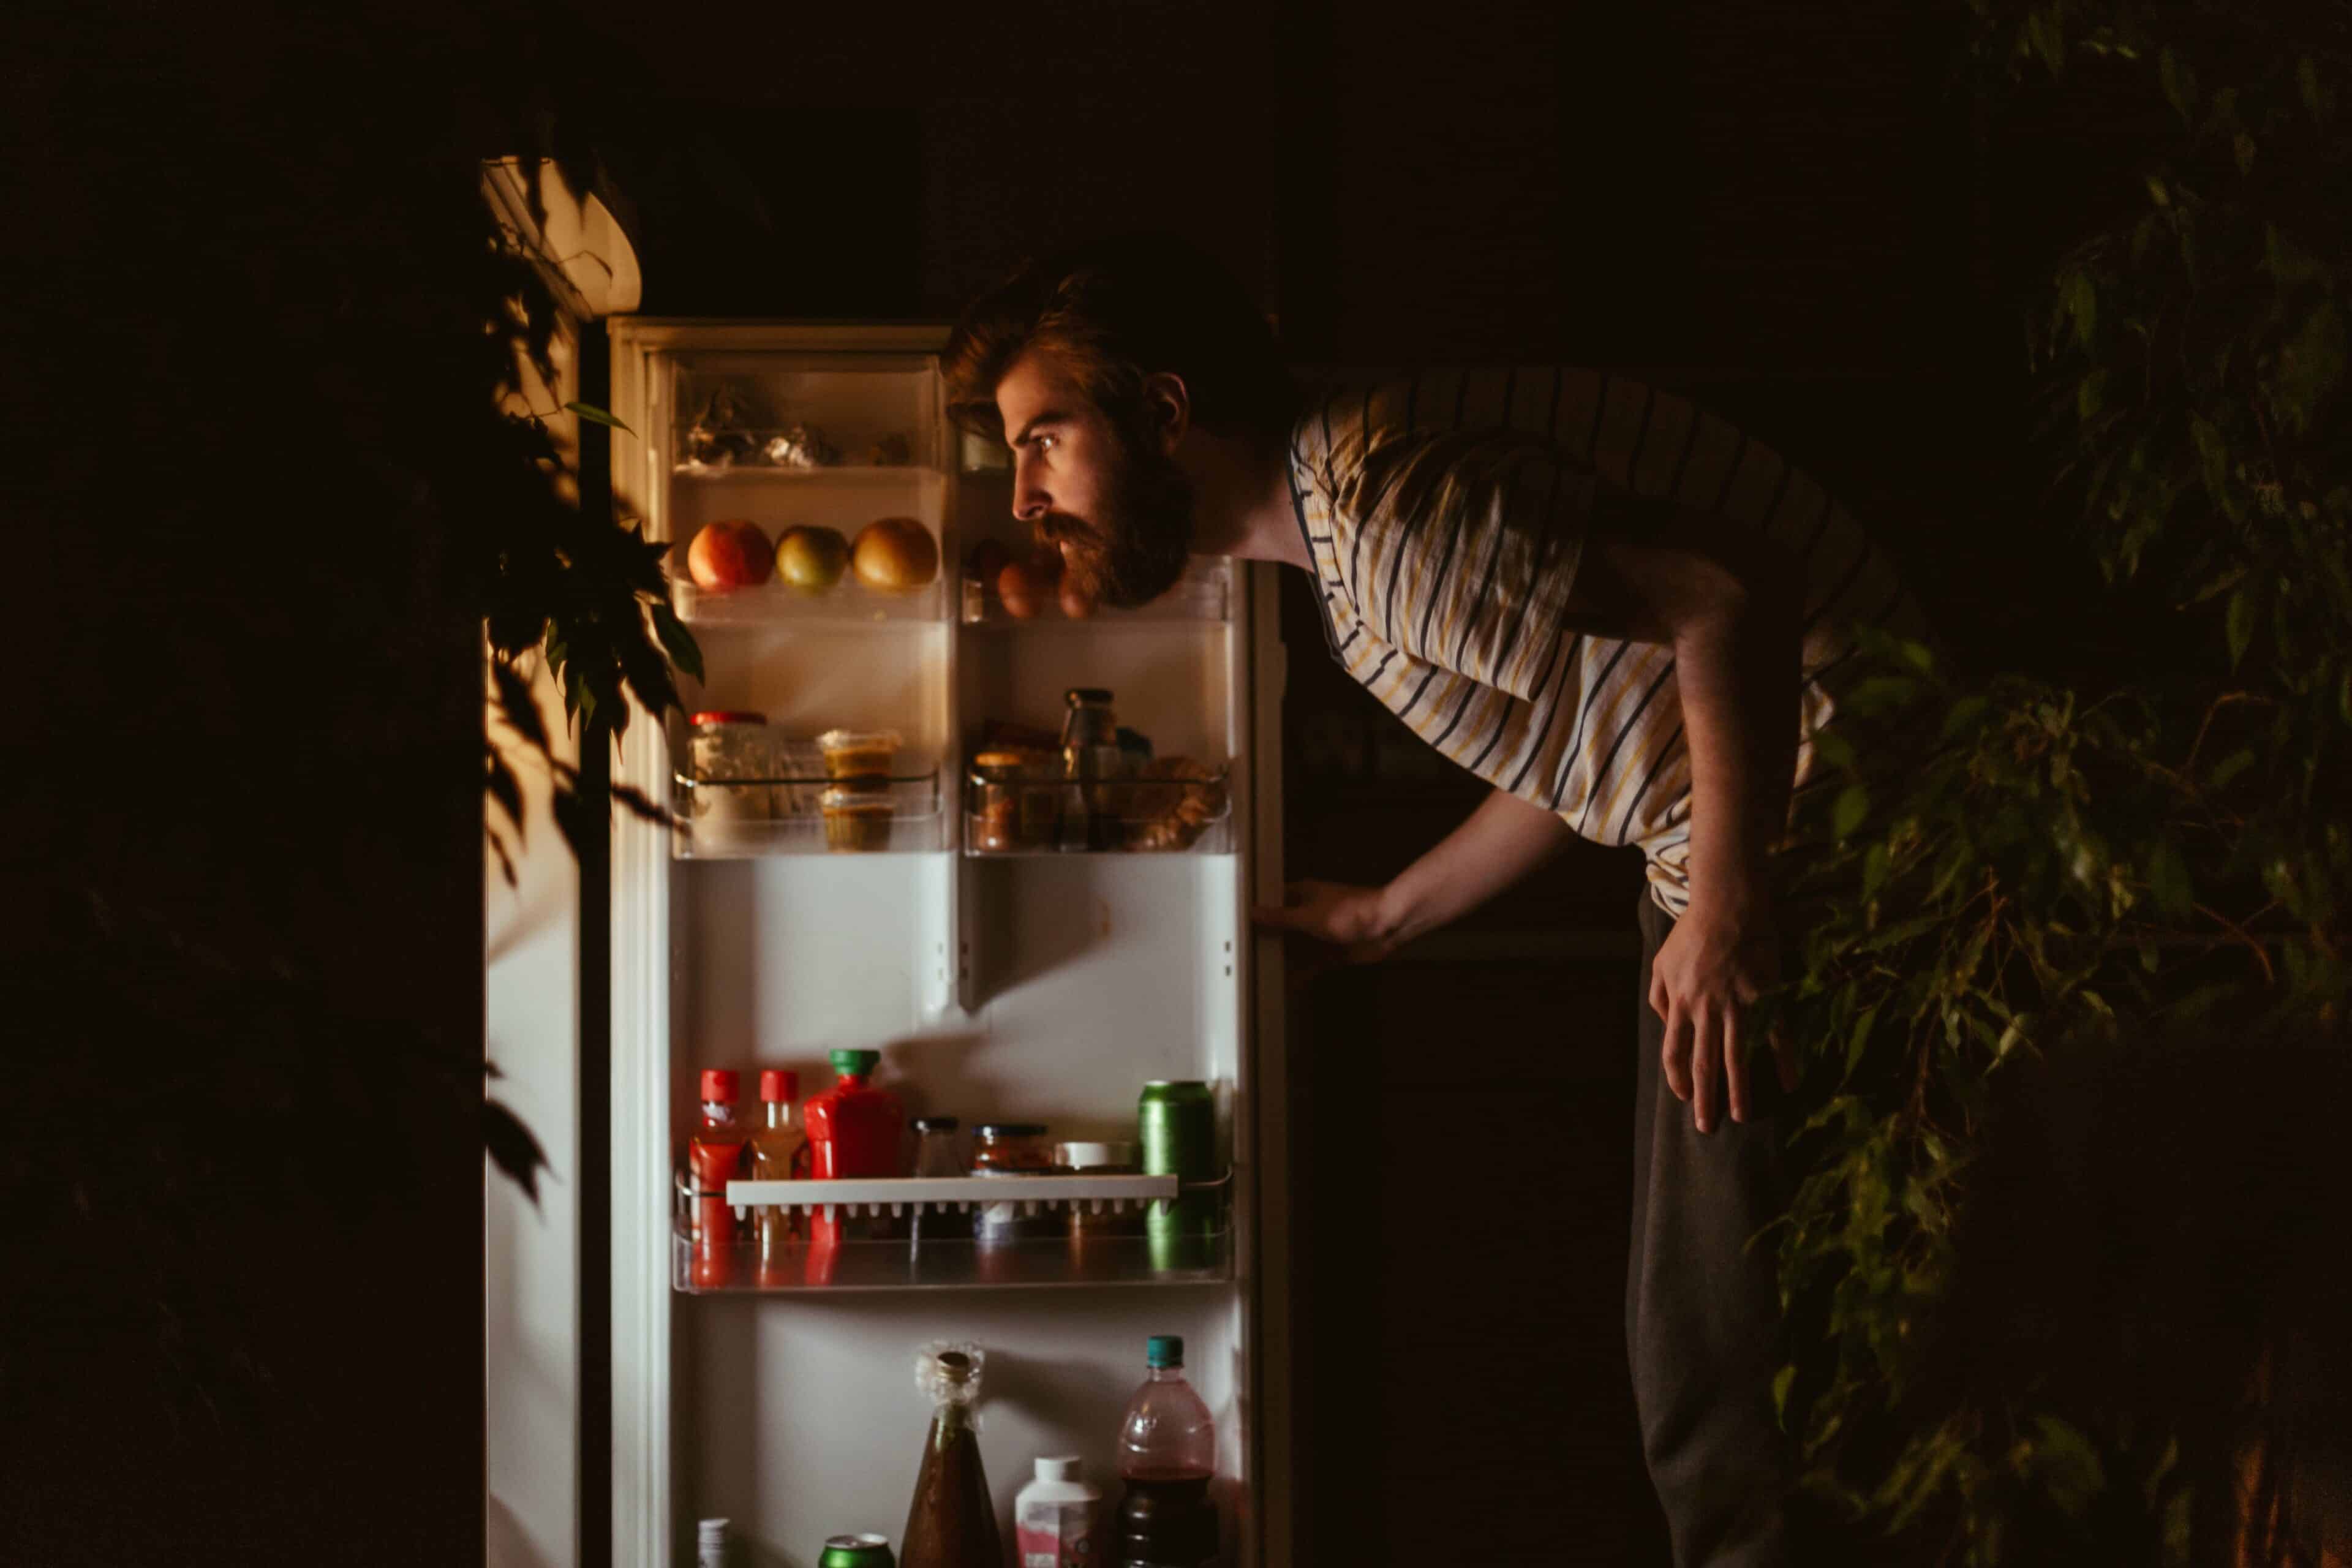 Man looking for healthy late-night snacks in the refrigerator late night